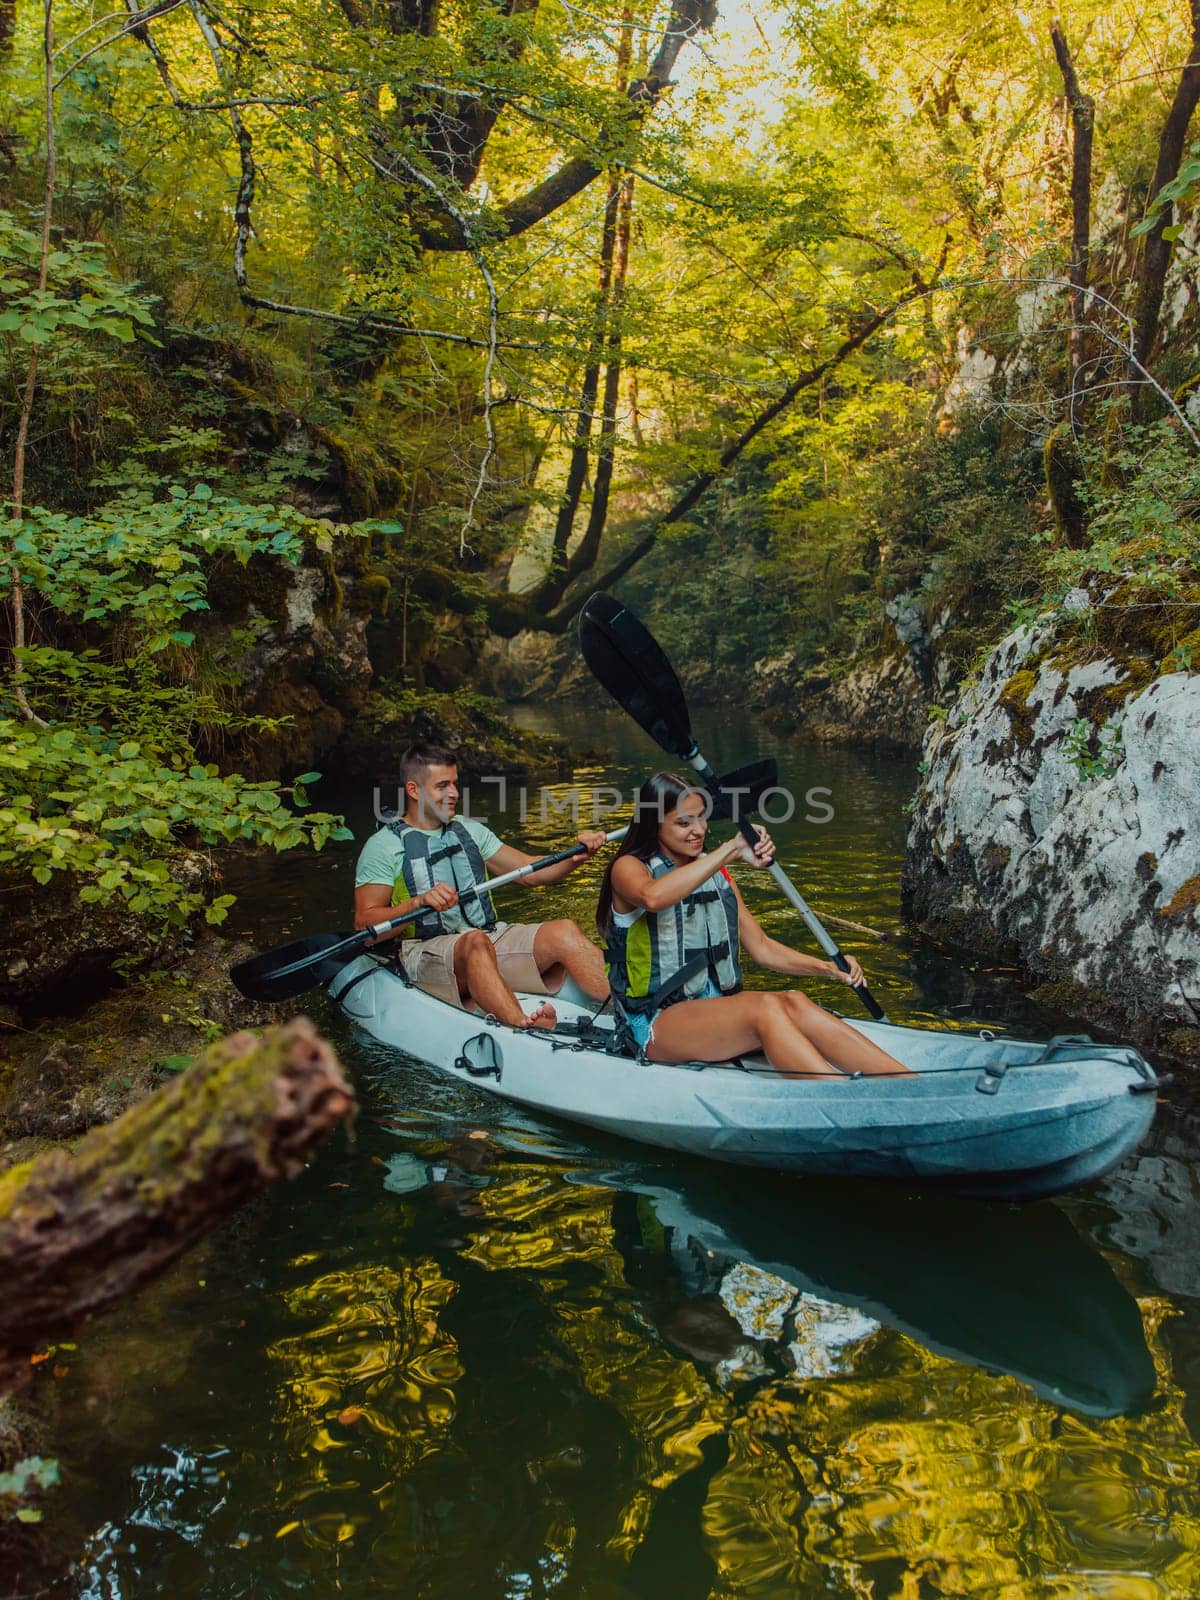 A young couple enjoying an idyllic kayak ride in the middle of a beautiful river surrounded by forest greenery by dotshock